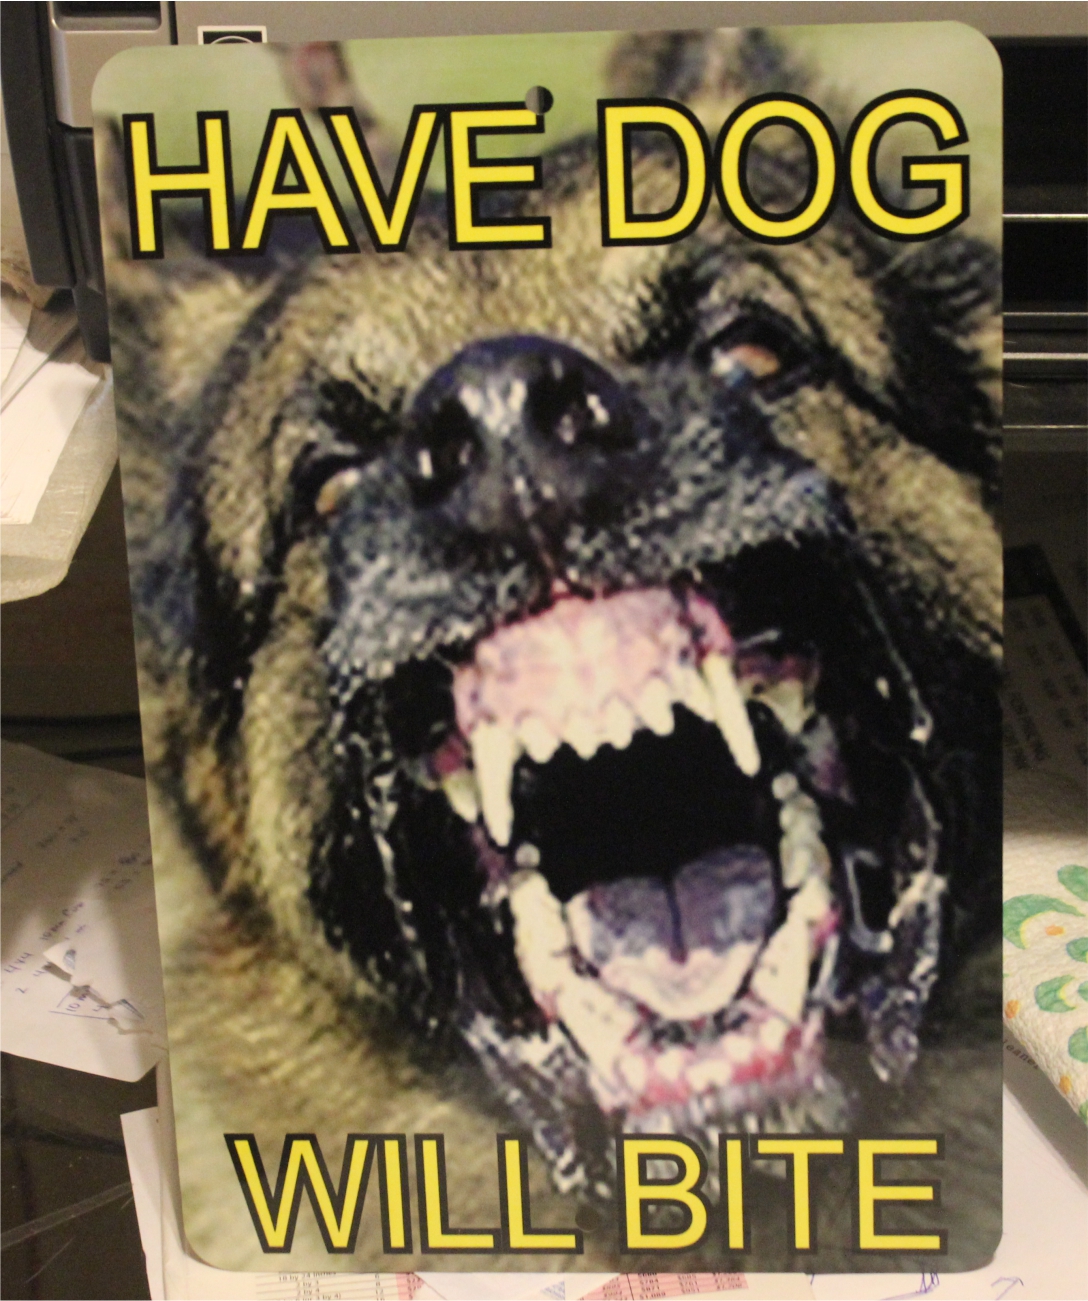 beware of dog made with sublimation printing